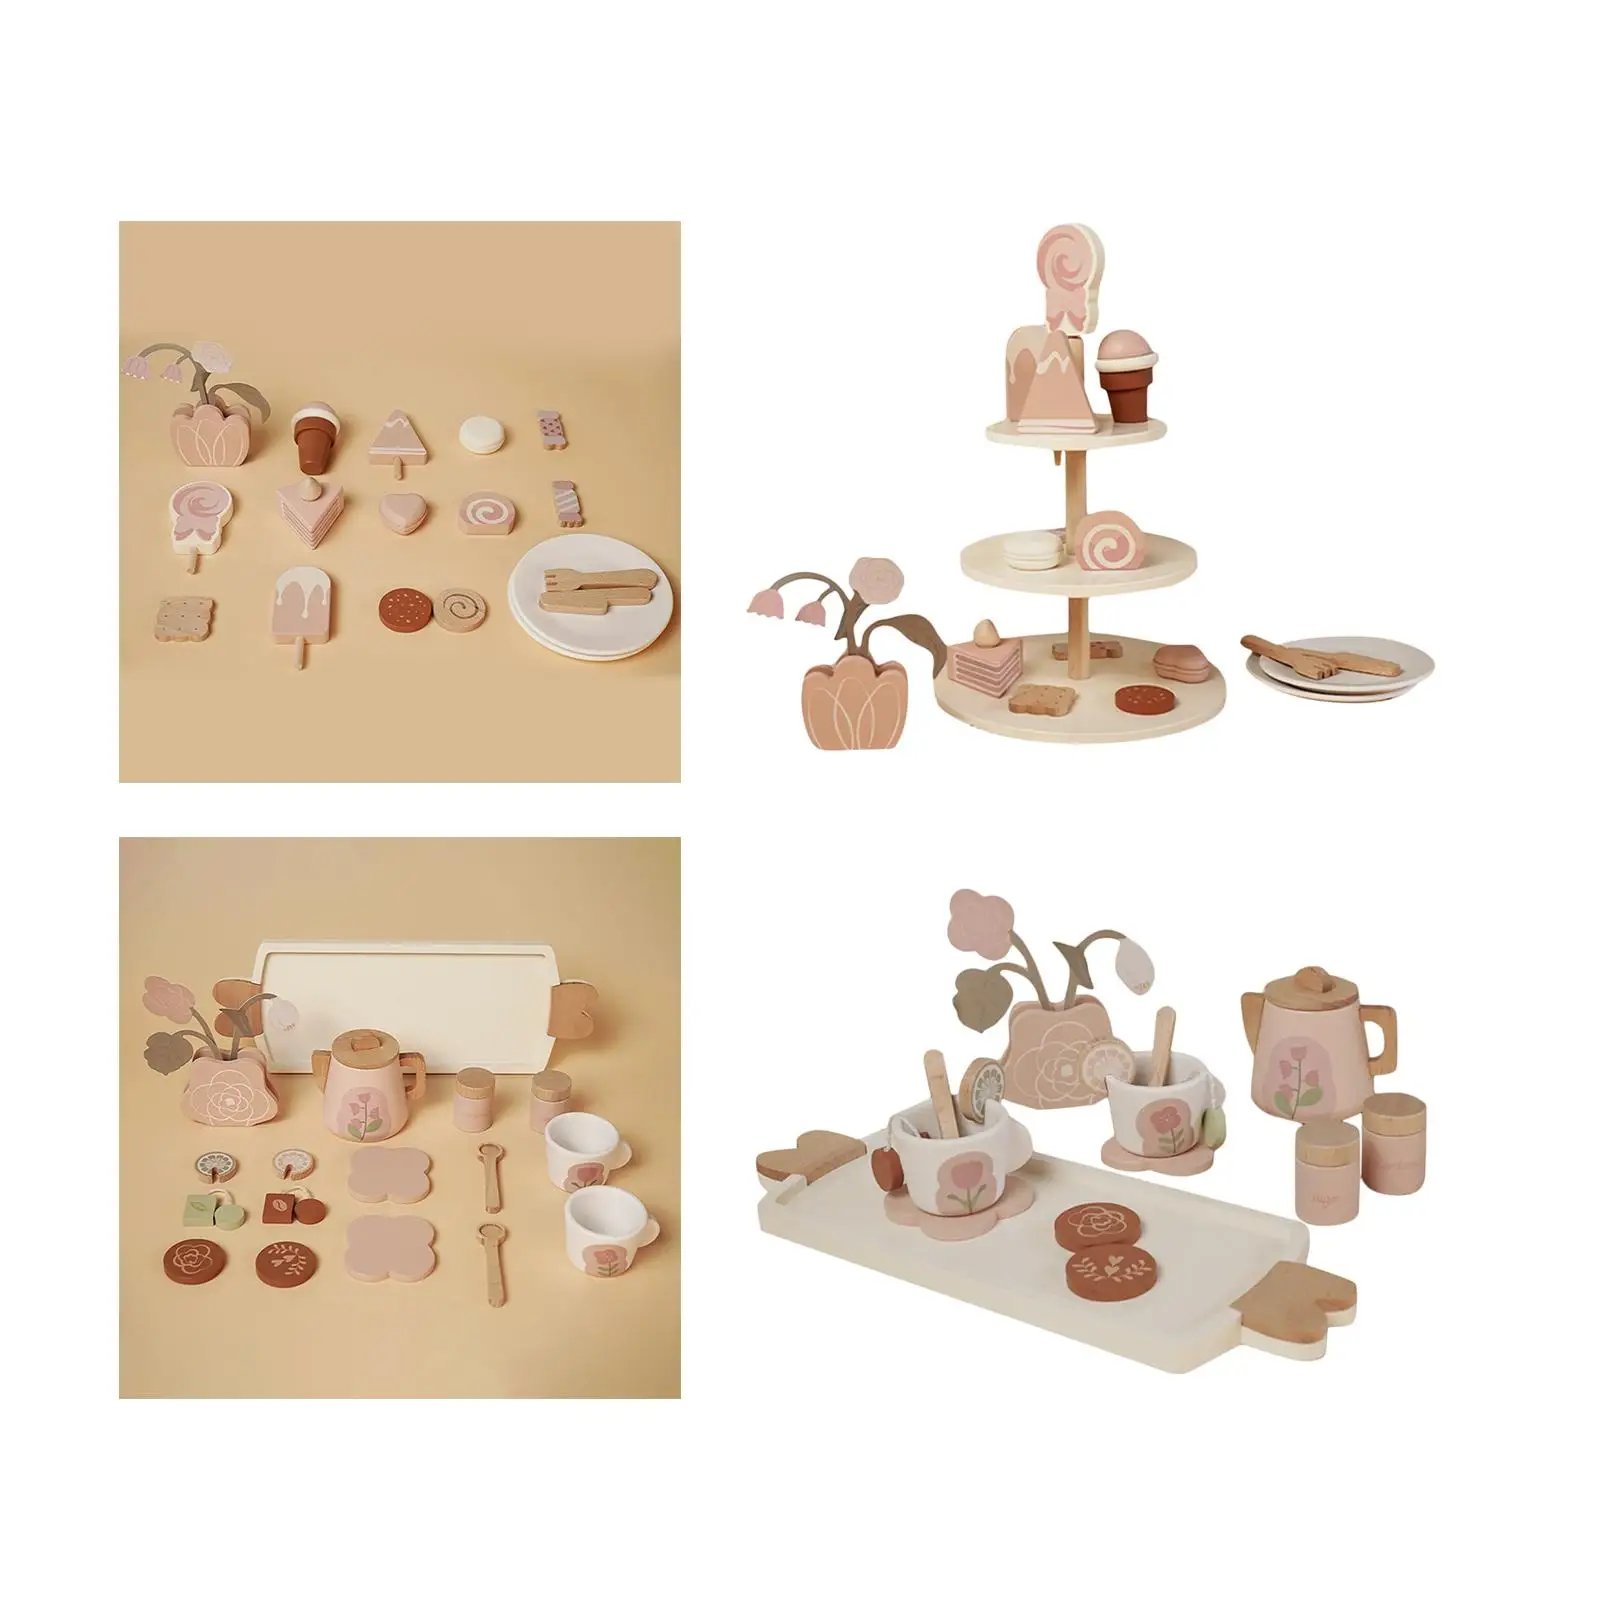 Wooden Afternoon Tea Set Toy Pretend Play Kitchen Toys Kitchen Accessories Dessert Playset Mini Toys Girls tea toy for Toddlers